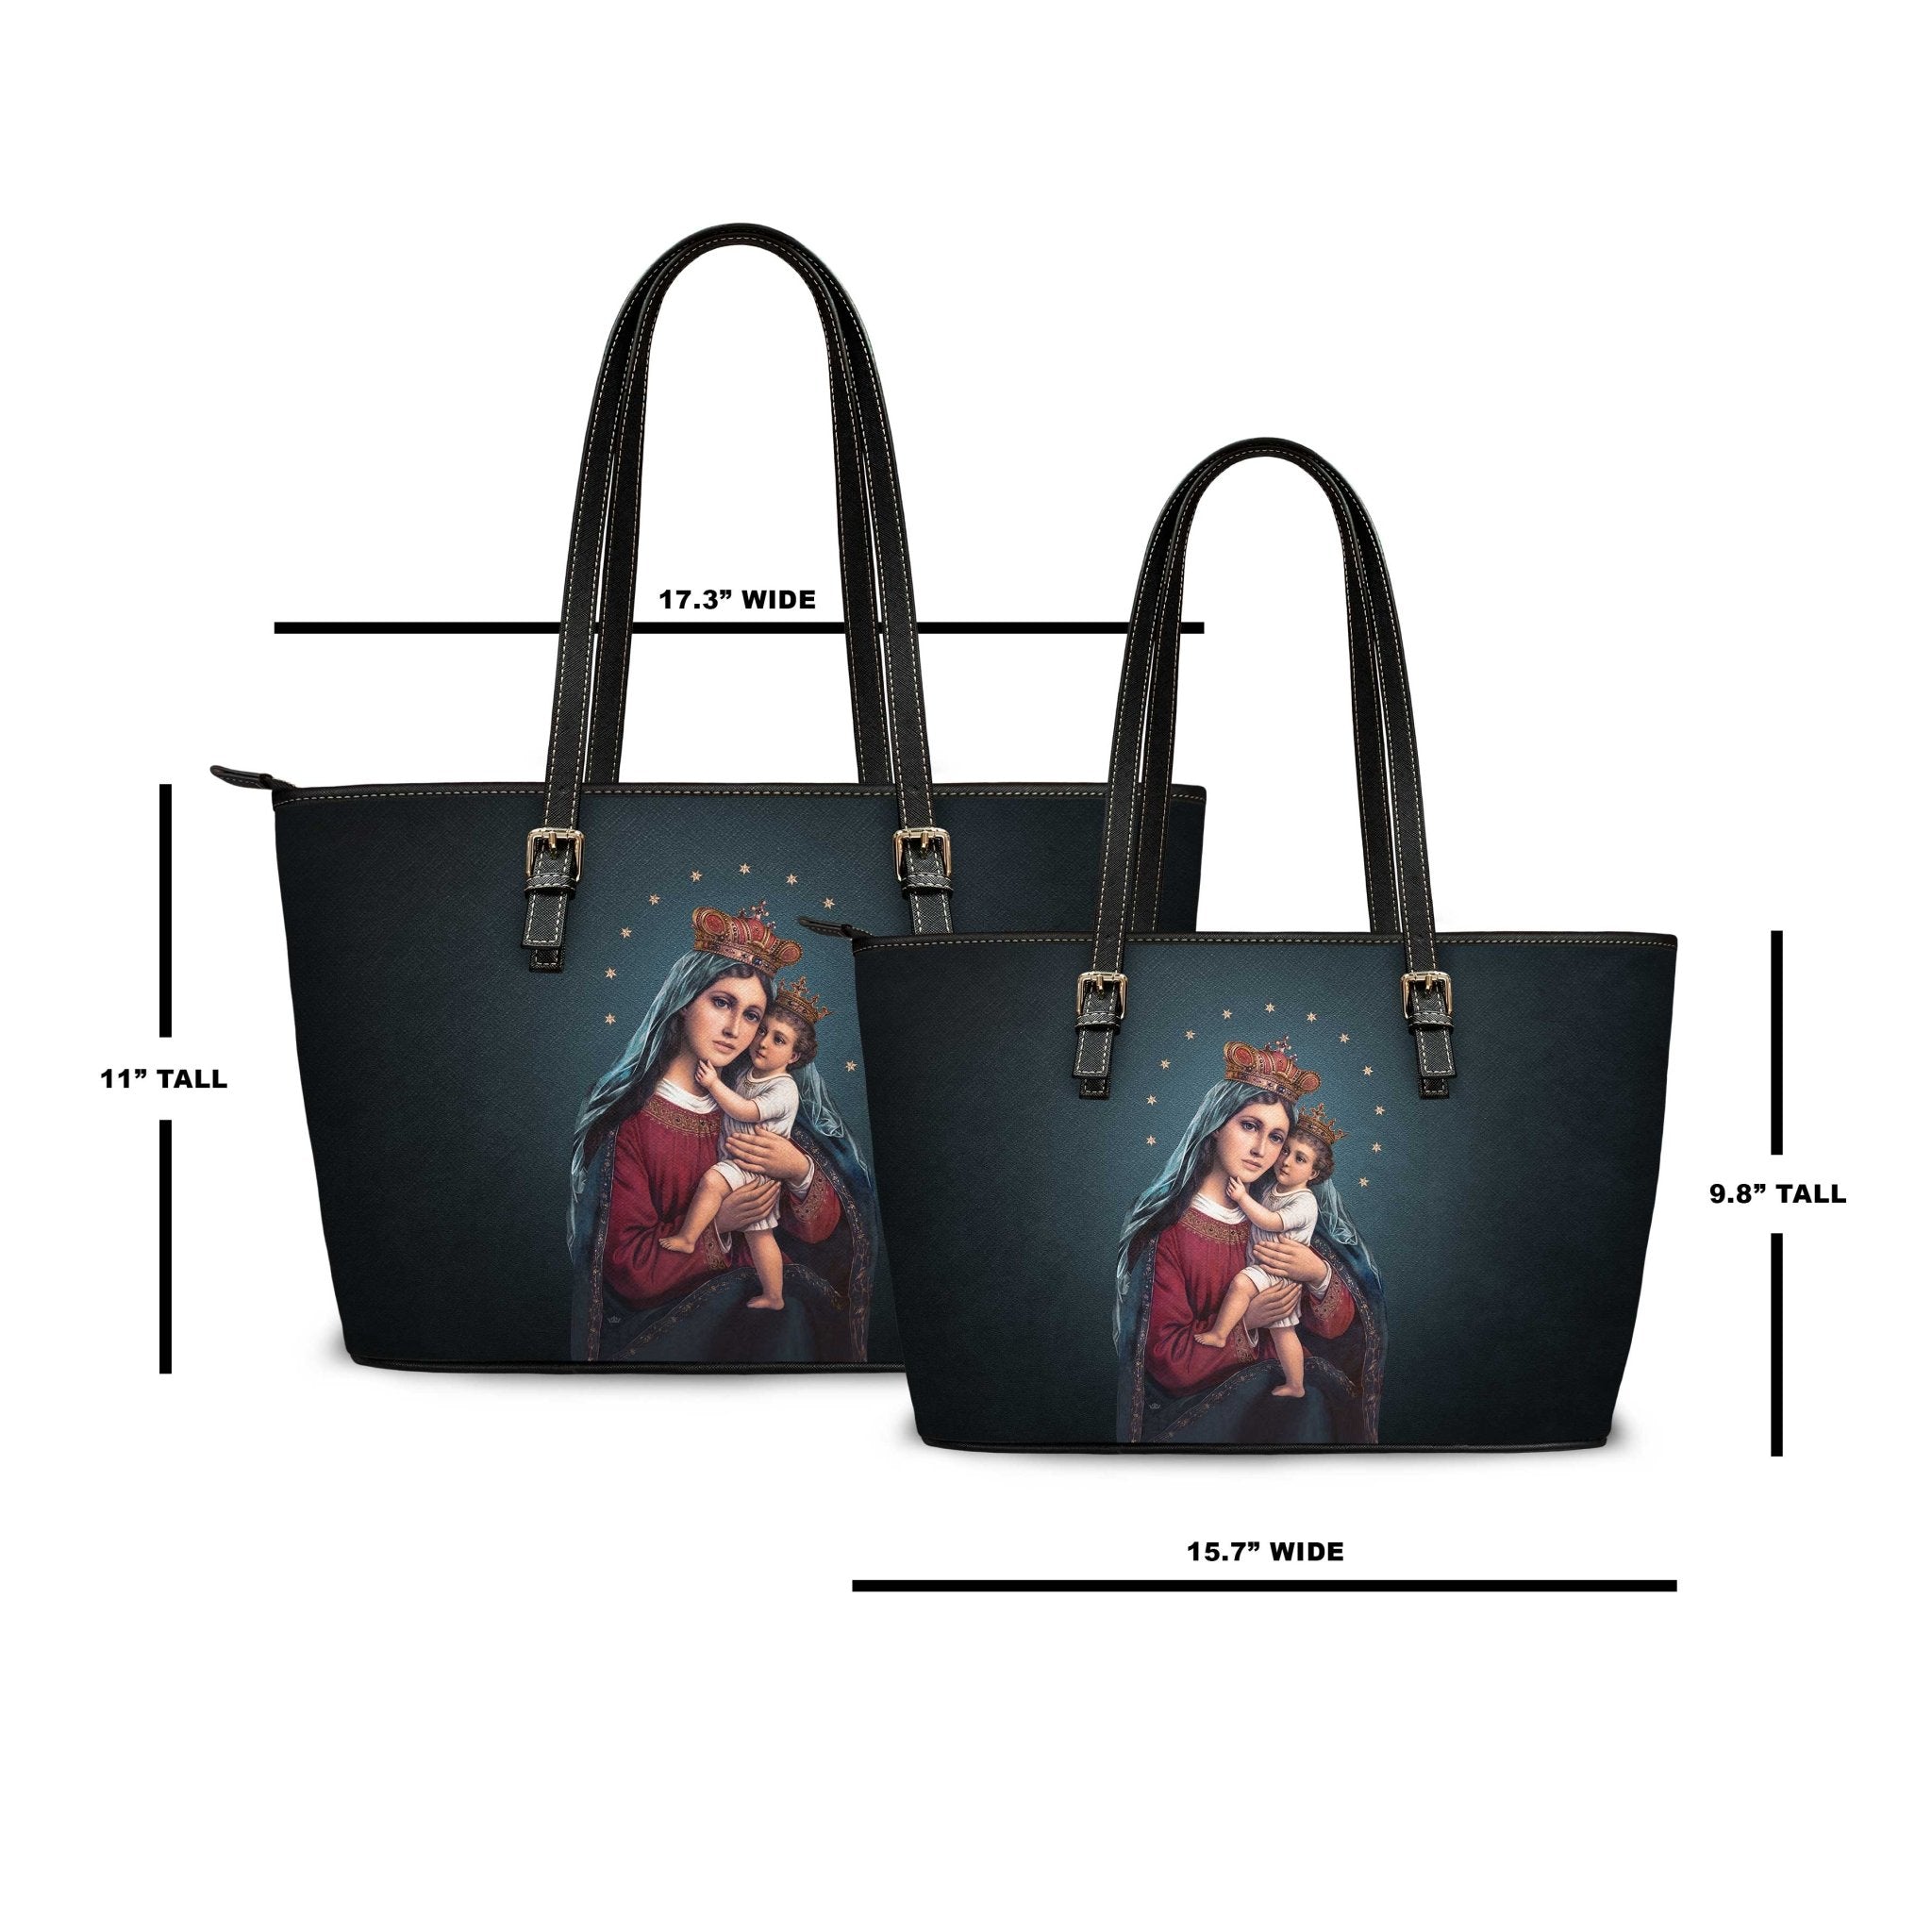 Divine King and Queen Tote Bag (Midnight Blue) - VENXARA®